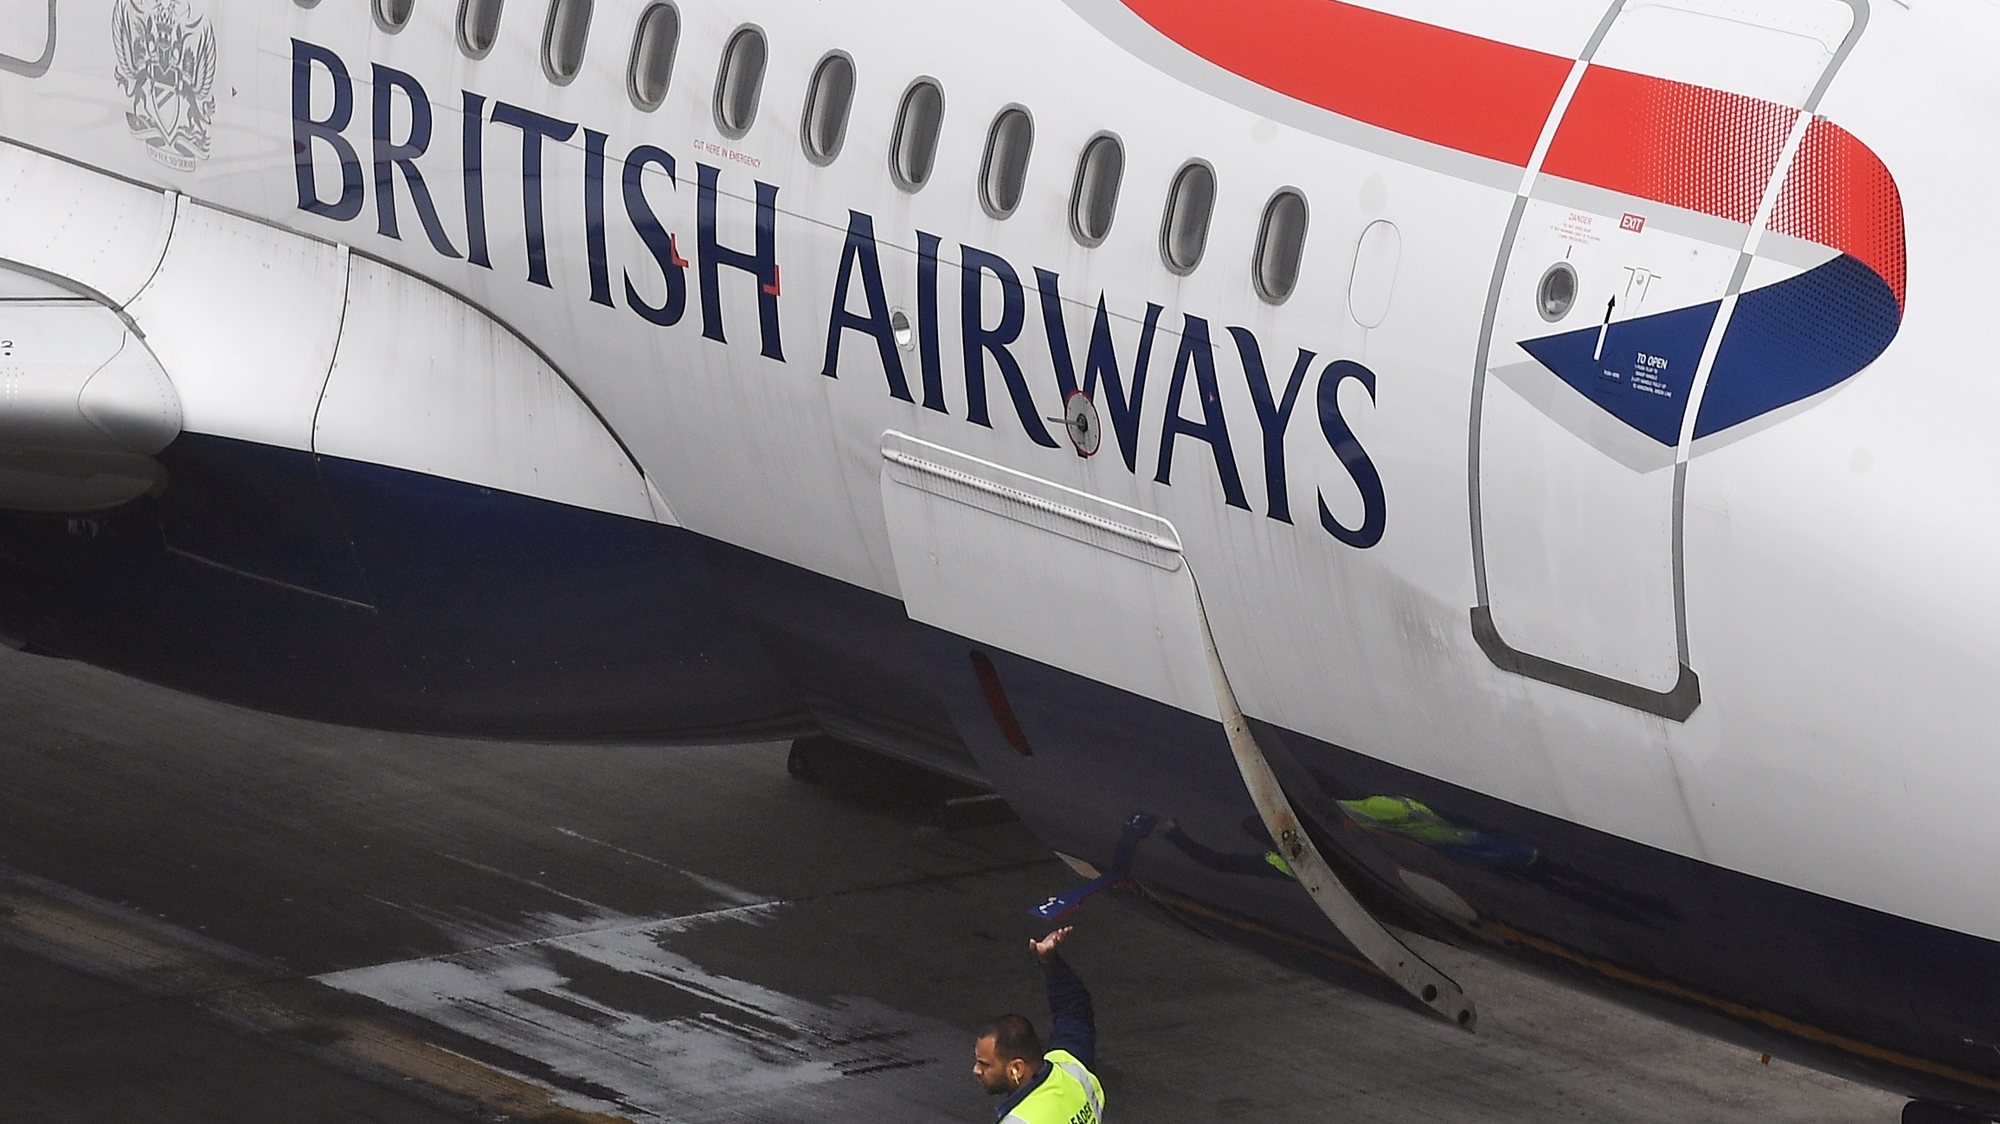 epa08749894 (FILE) - Ground personnel closes a cargo door of a British Airways aircraft standing on a parking position at Heathrow Airport in London, Britain, 29 May 2017 (reissued 16 October 2020). Britain&#039;s flagship aircraft carrier British Airways was on 16 October 2020 fined by the British Information Commissioner&#039;s Office, IOC, 20 million pound for &#039;failing to protect the personal and financial details of more than 400,000 of its customers&#039;, and processing &#039;personal data without adequate security measures in place&#039; as the authority stated.  EPA/ANDY RAIN *** Local Caption *** 56053393